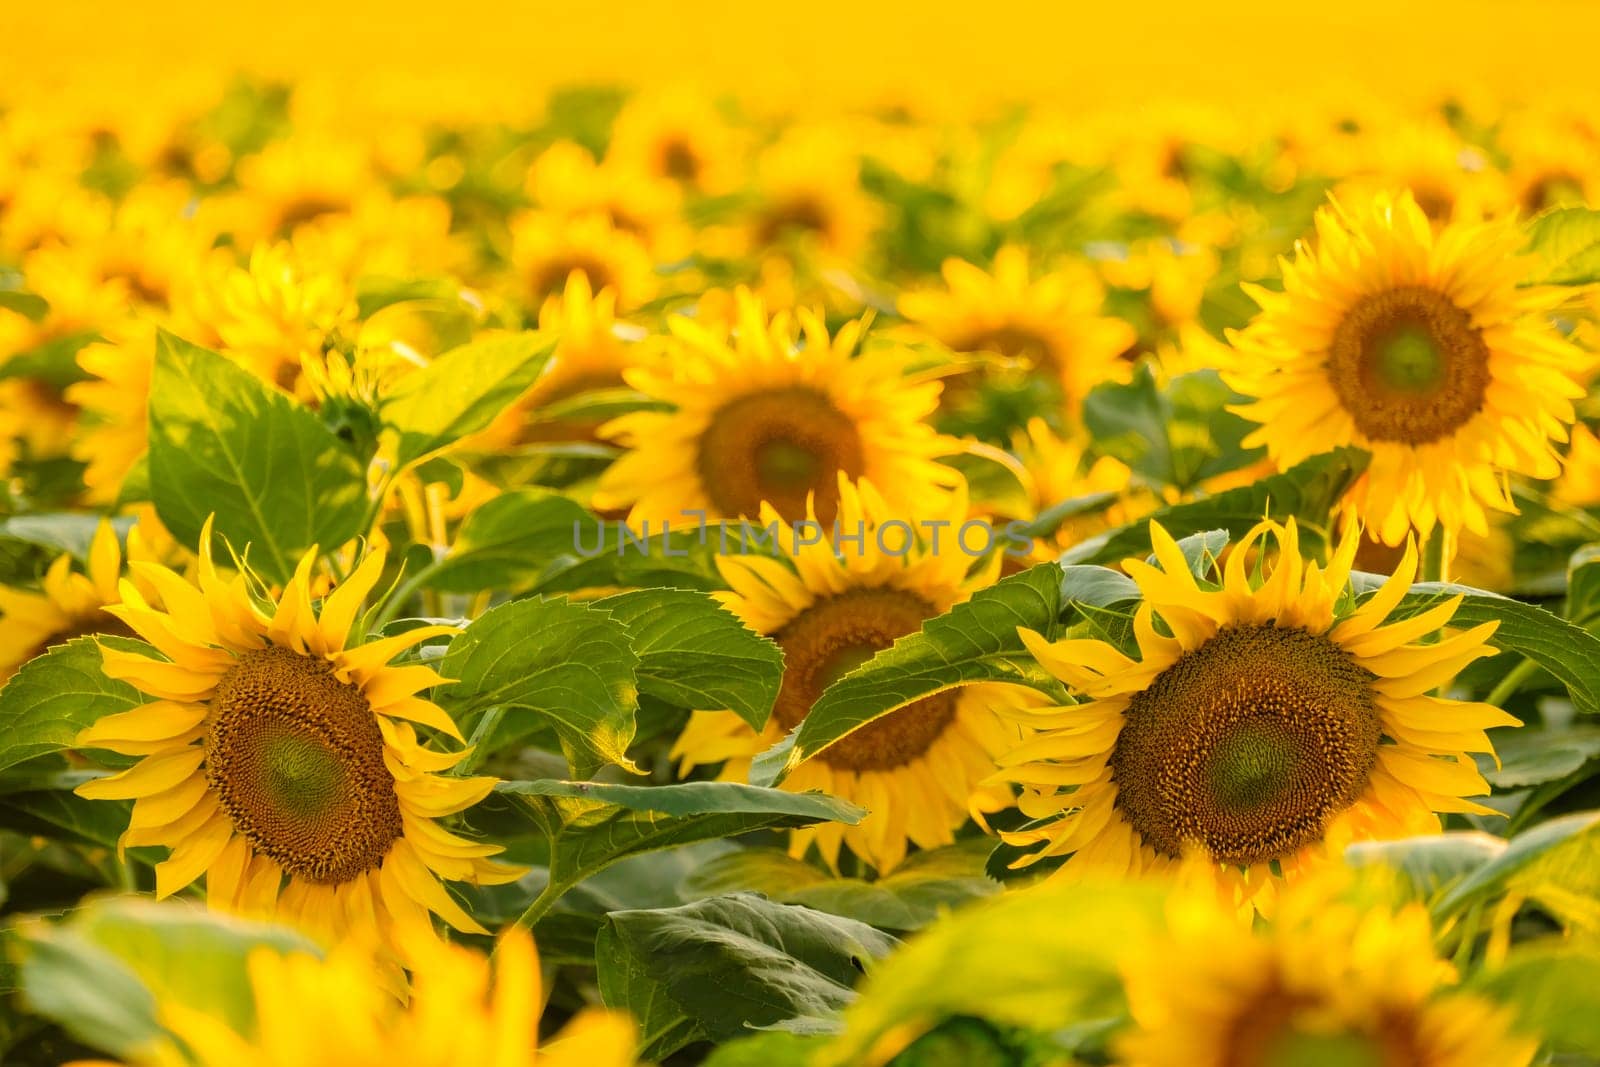 Blooming sunflowers with bright yellow petals grow in field by vladimka